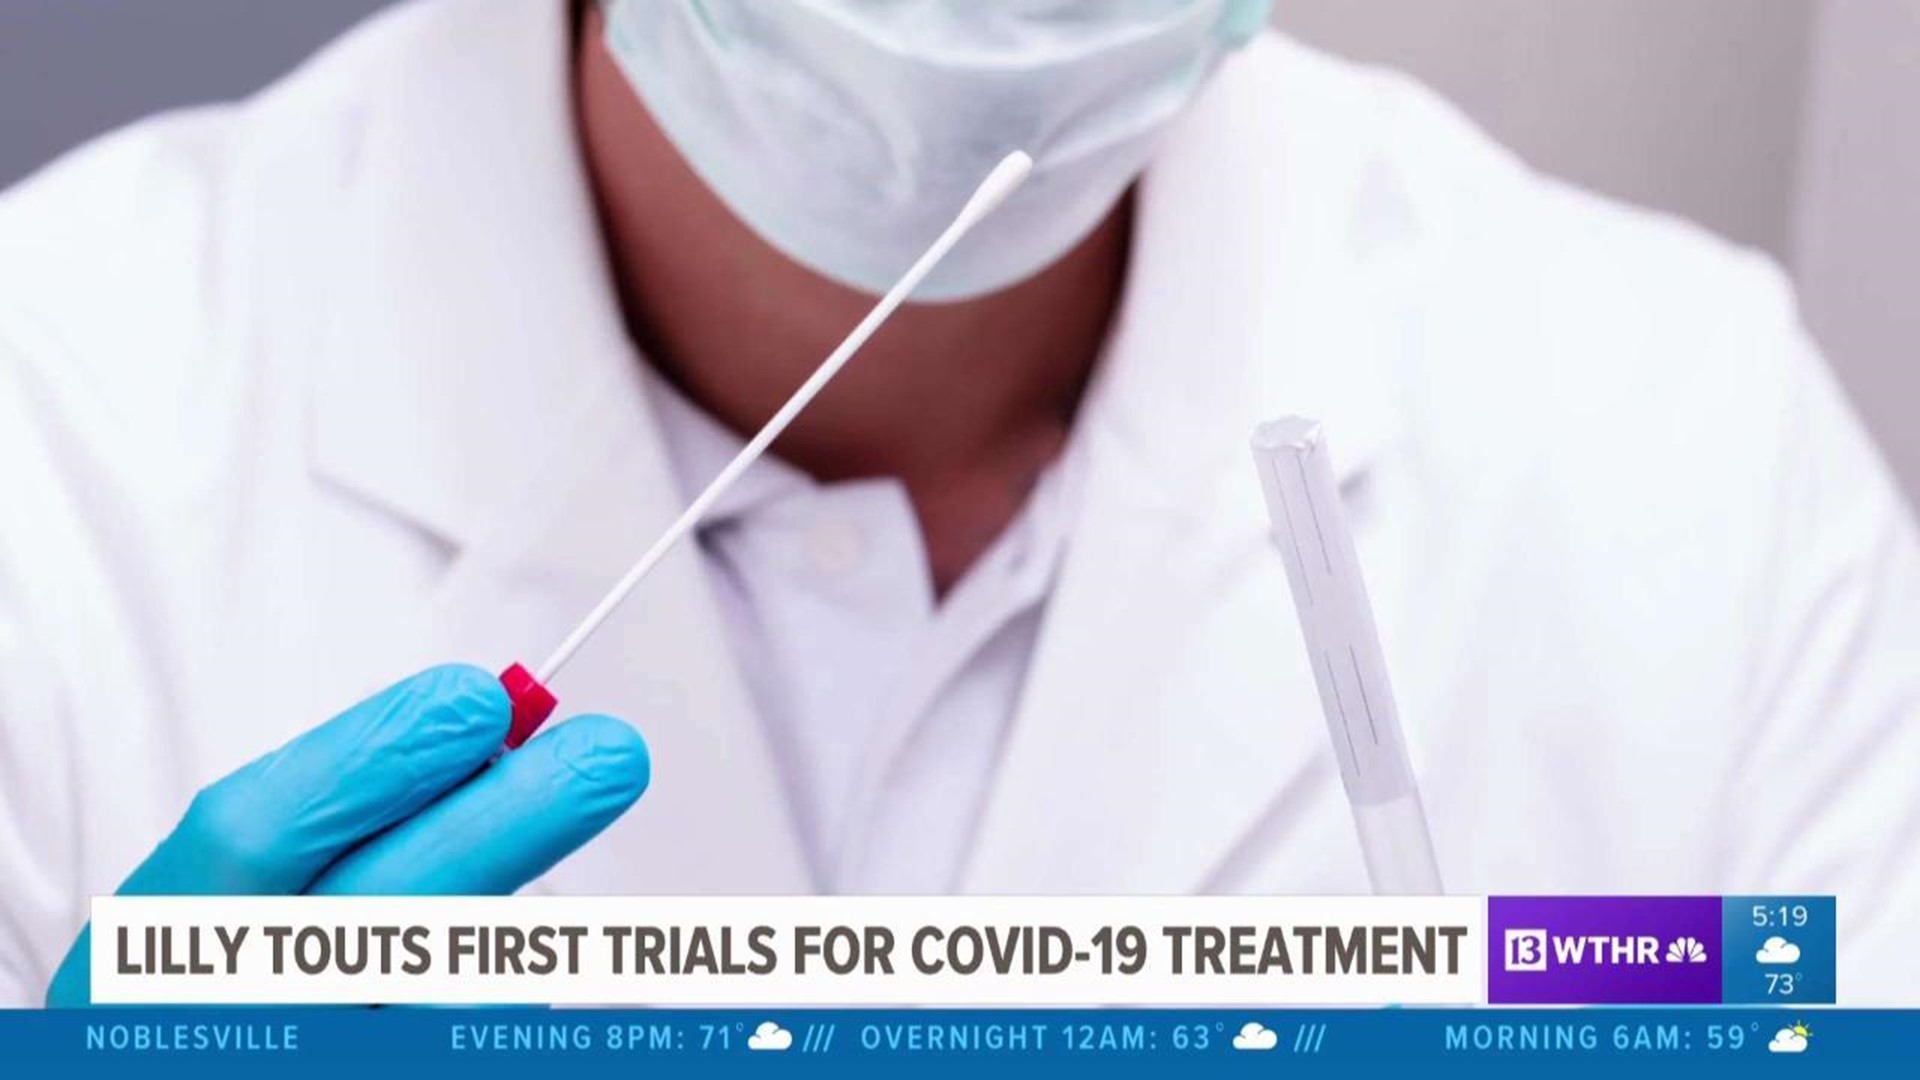 Lilly antibody trials for COVID-19 treatment